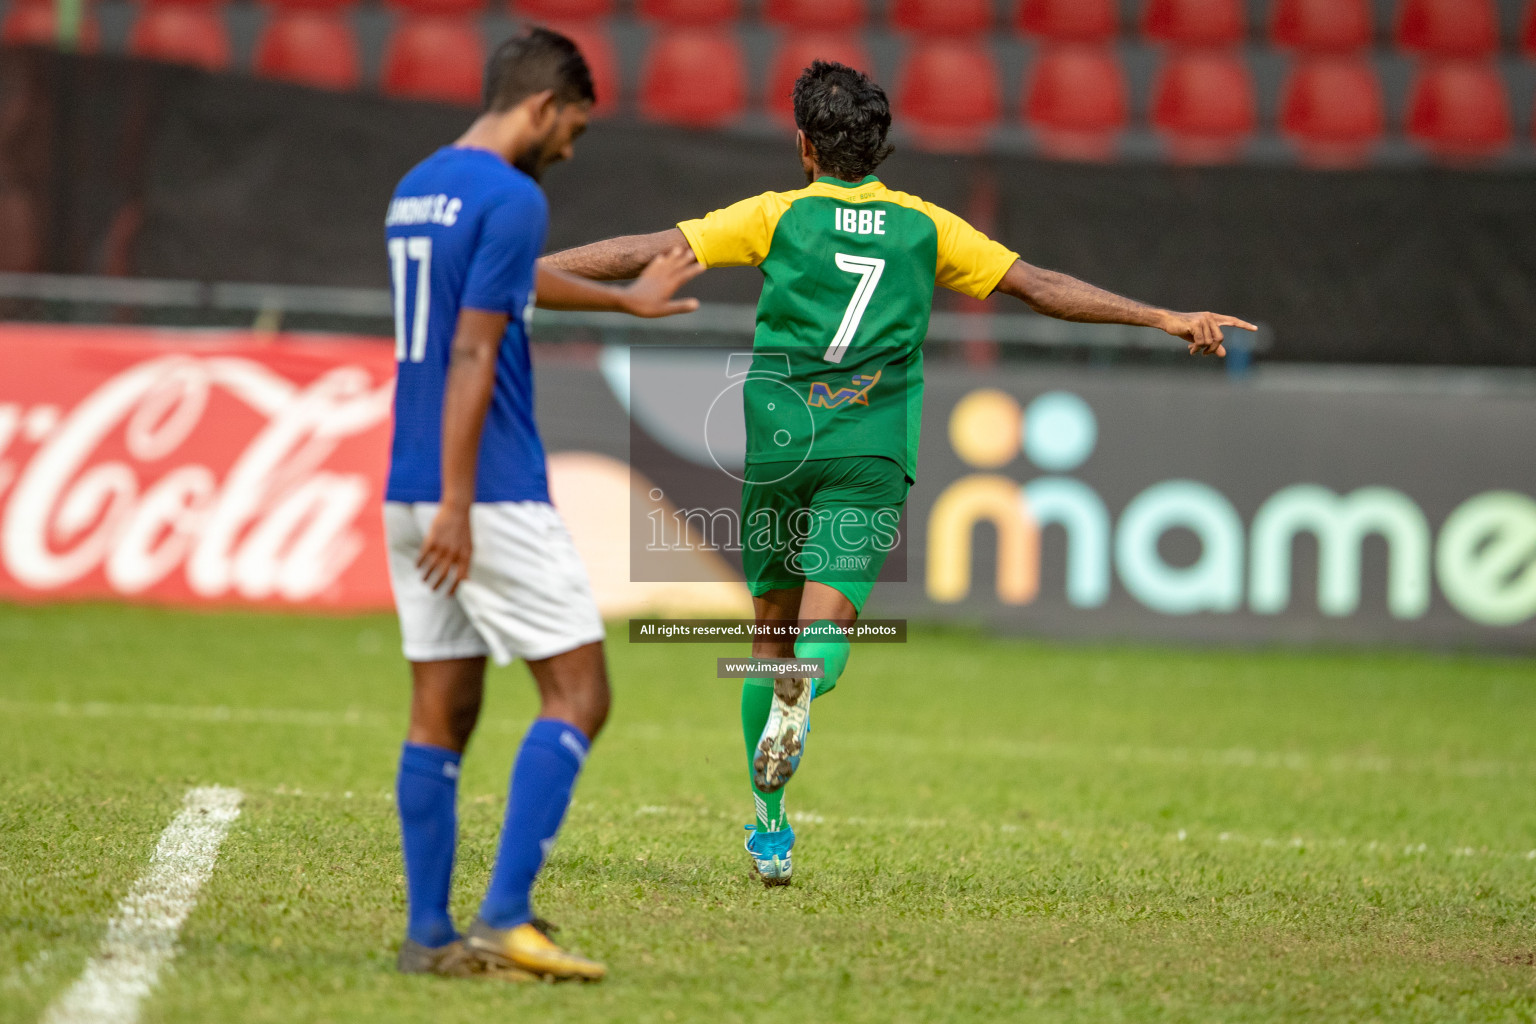 Maziya SRC vs Nilandhoo FC in in Dhiraagu Dhivehi Premier League held in Male', Maldives on 21st October 2019 Photos: Hassan Simah/images.mv